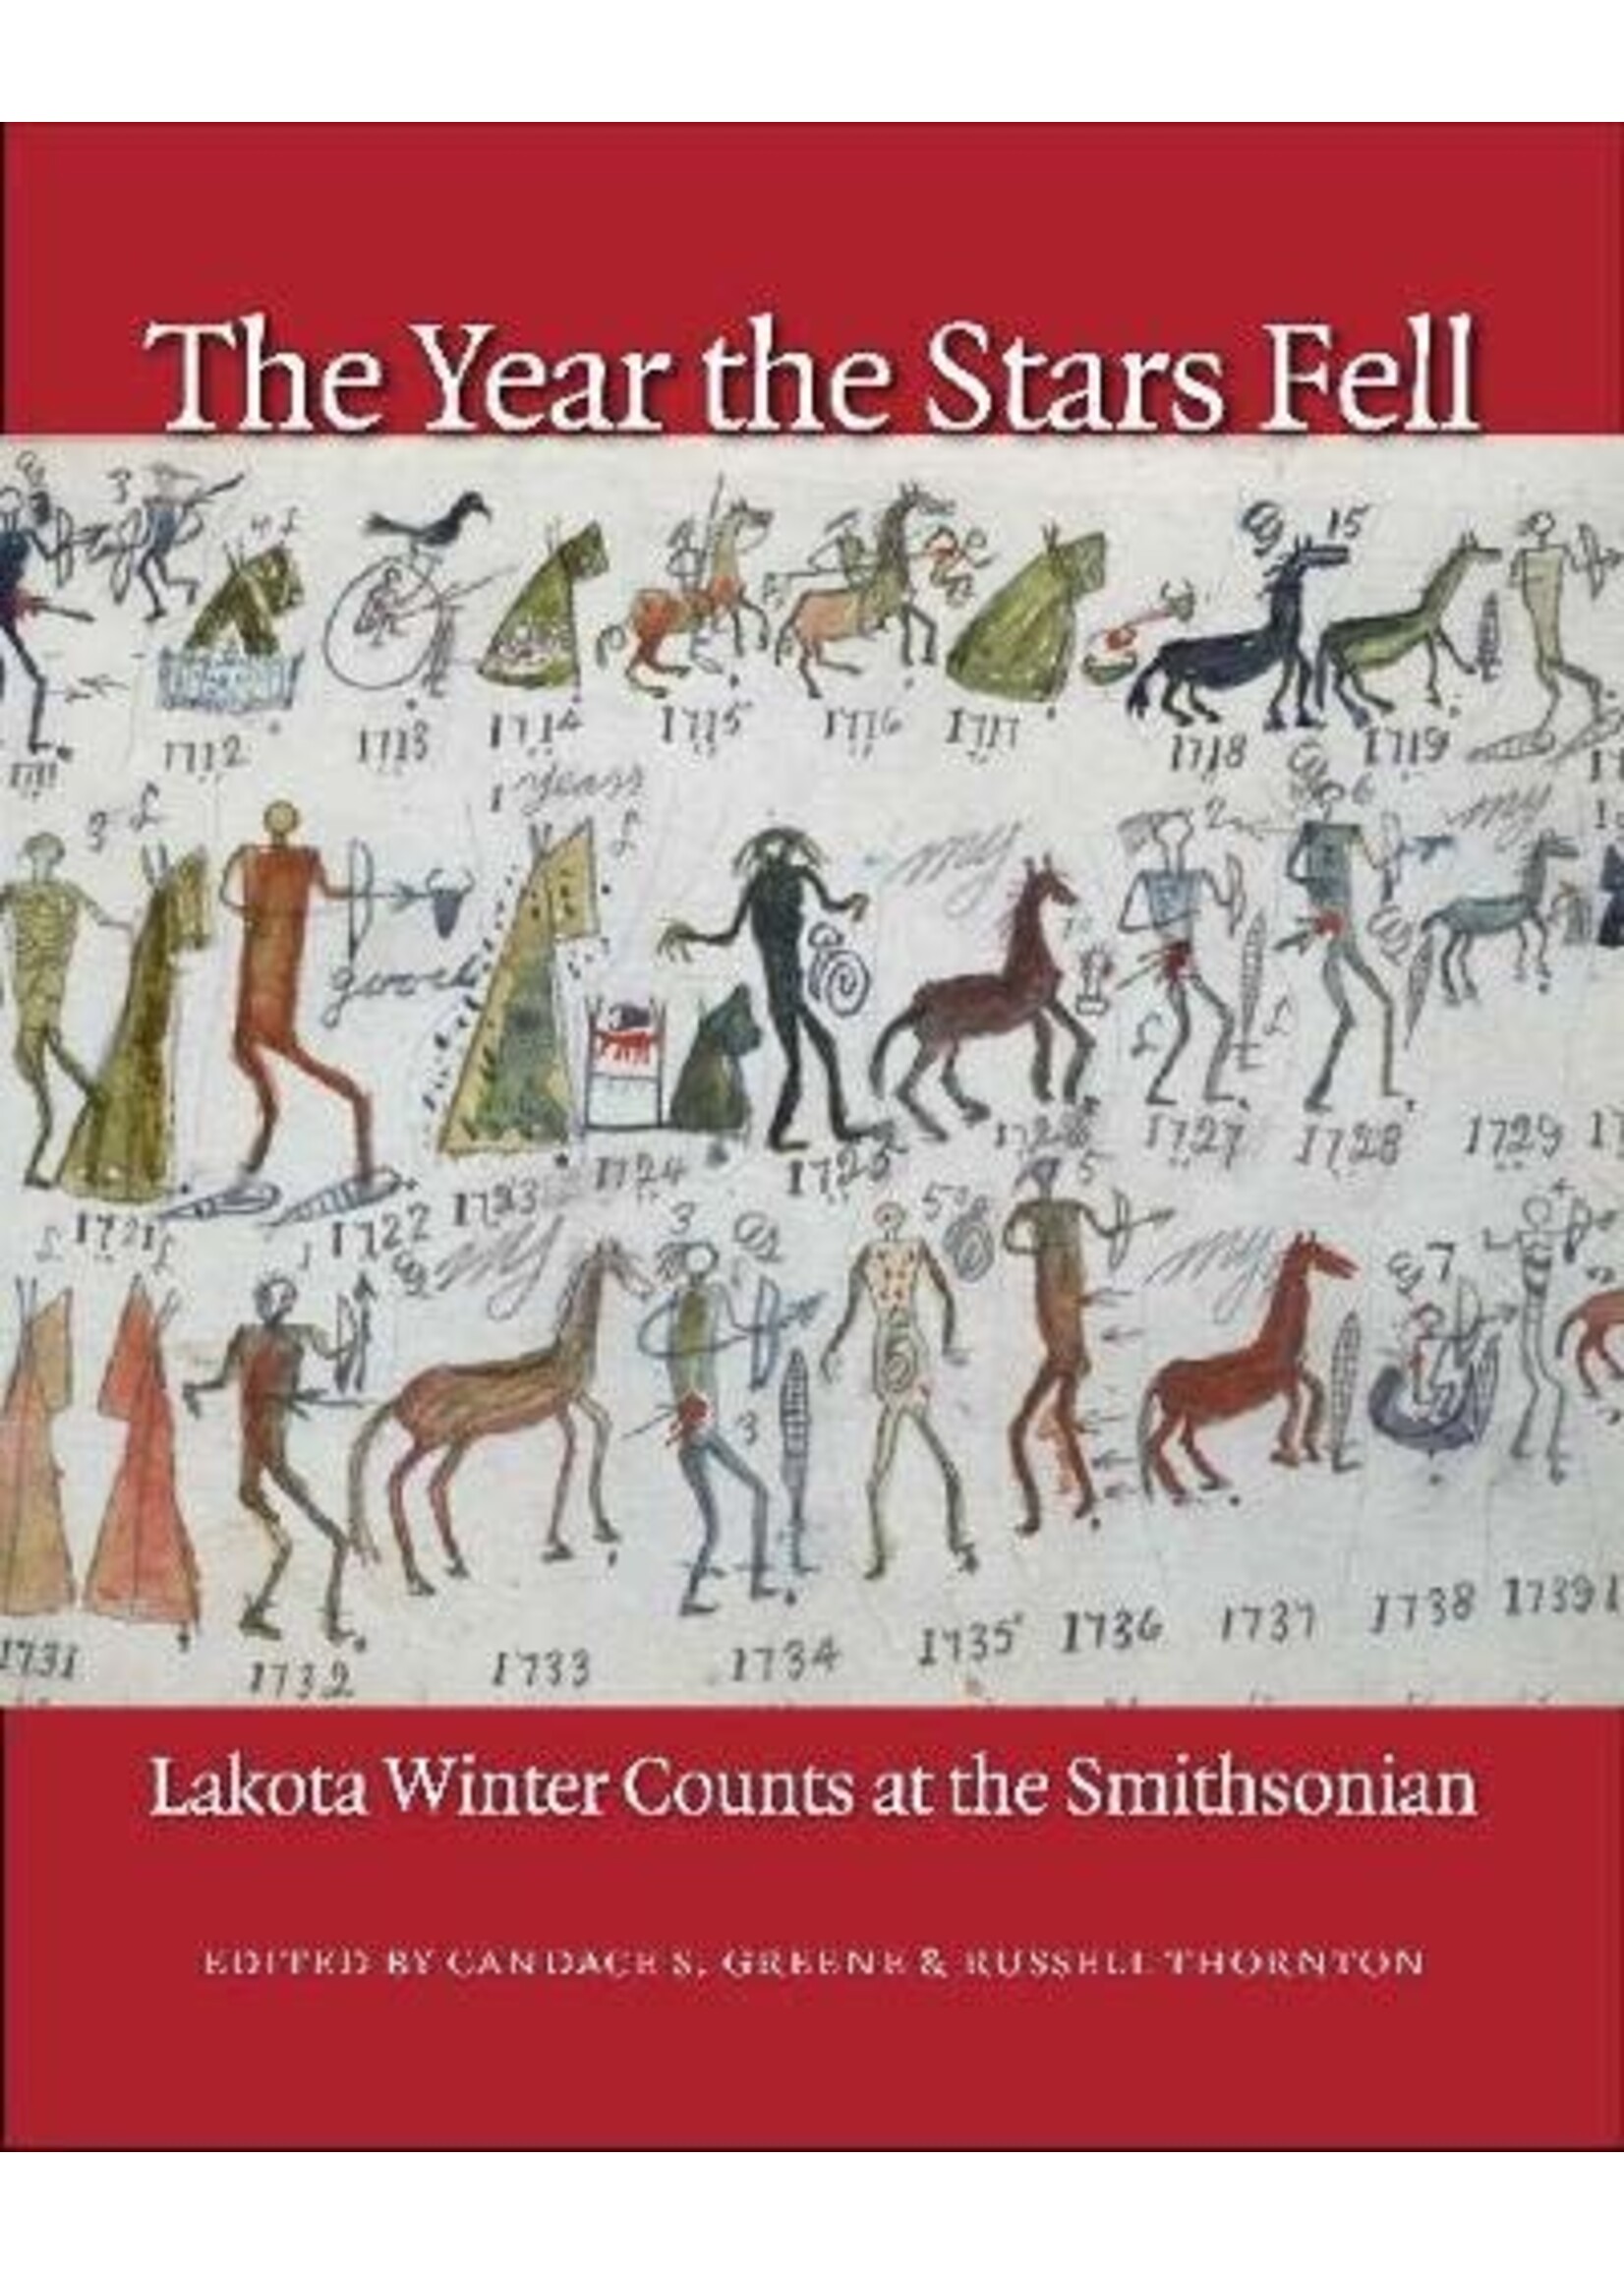 The Year the Stars Fell: Lakota Winter Counts at the Smithsonian